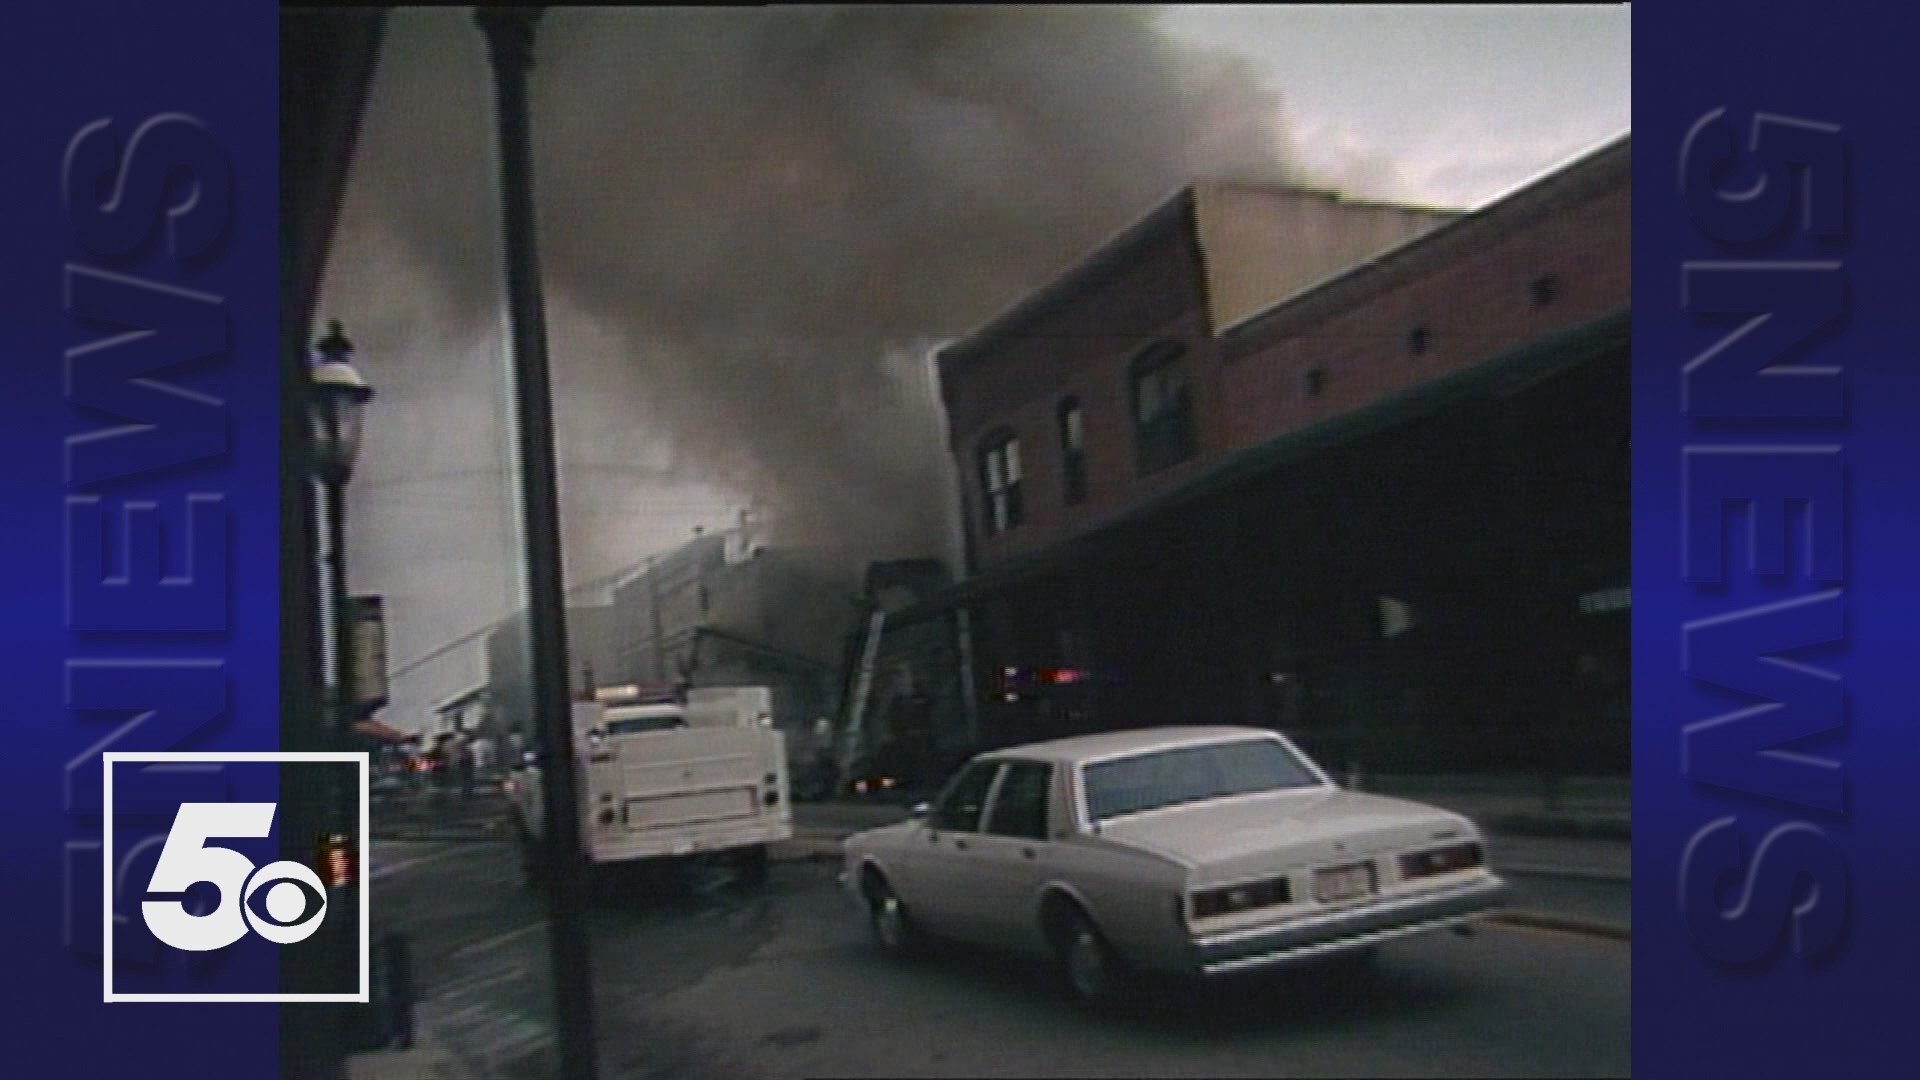 It has been 37 years since one of the deadliest crashes in the River Valley. In 1985, a semi-truck caused a fiery accident on Log Town Hill in Van Buren.